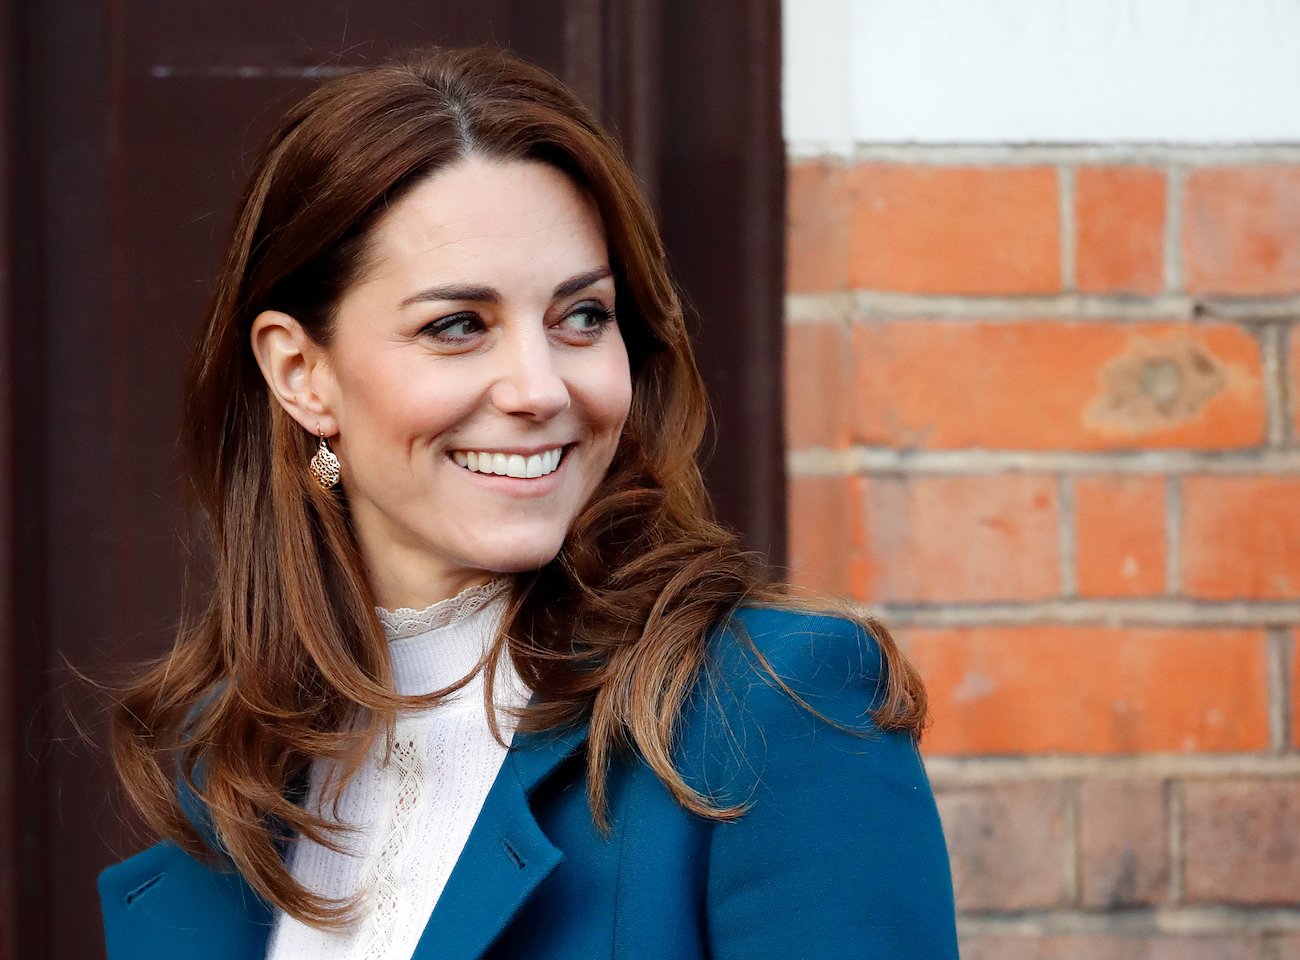 Kate Middleton smiling, looking to the side